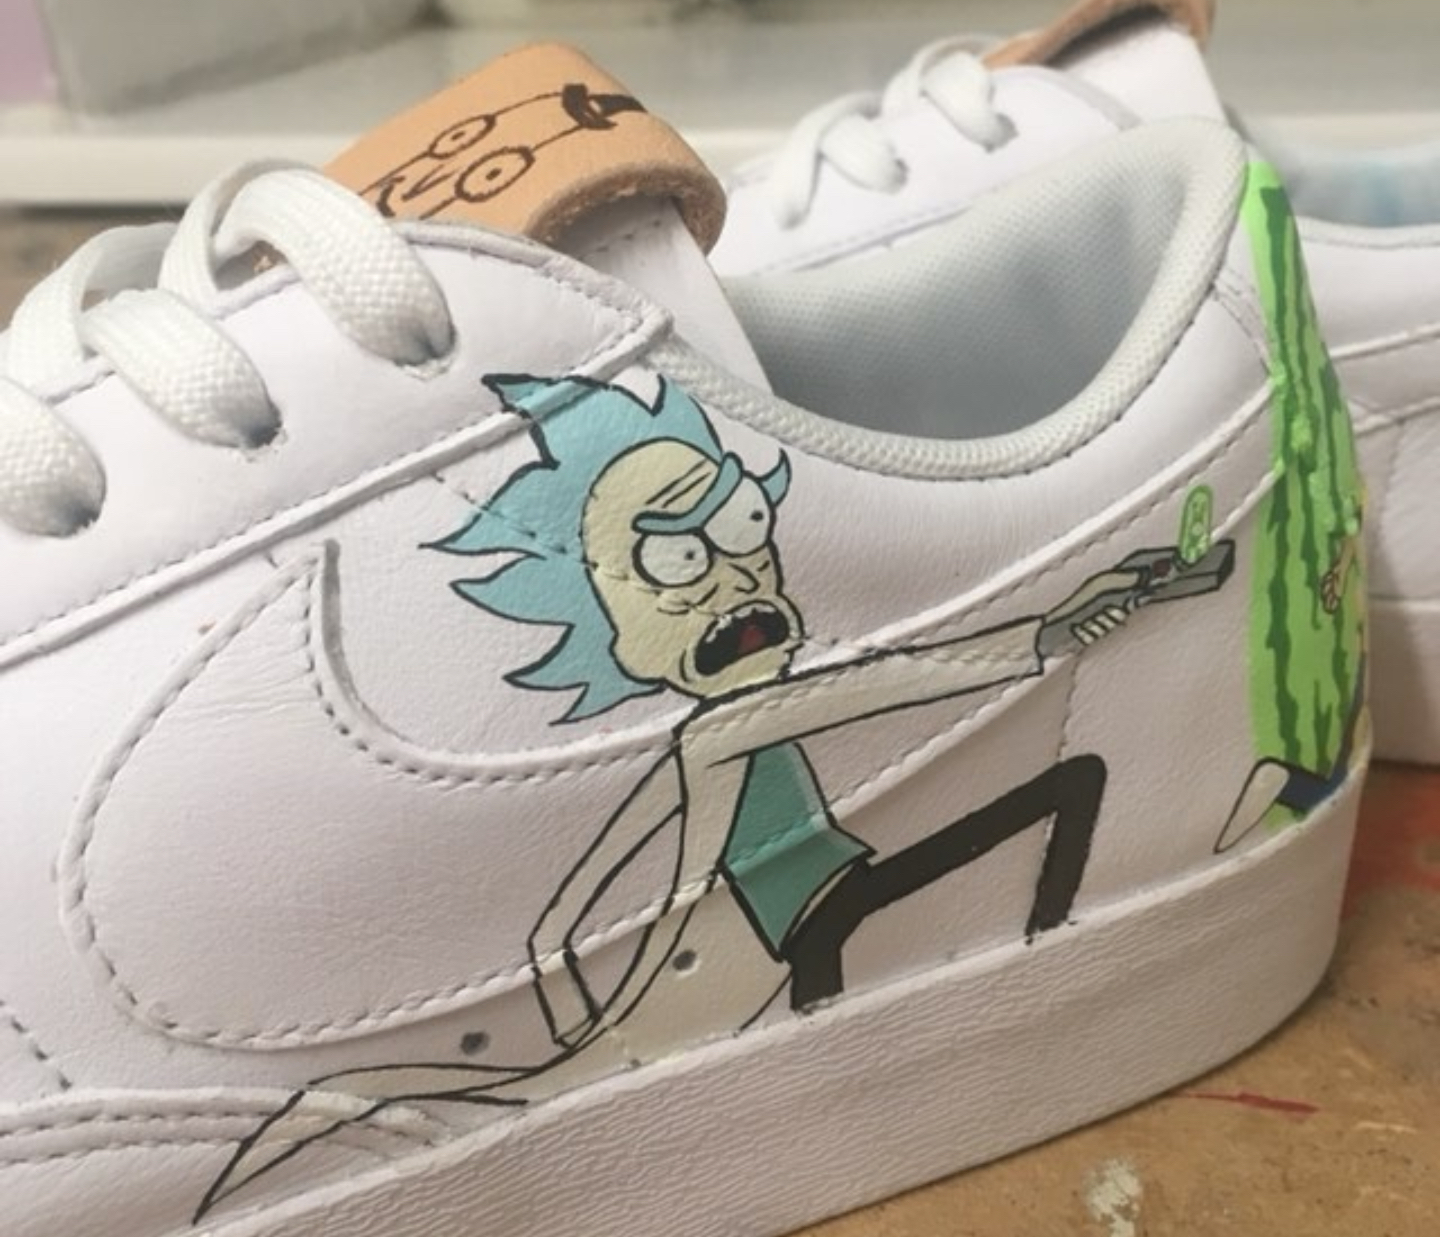 Check Out These Rick and Morty Customs 